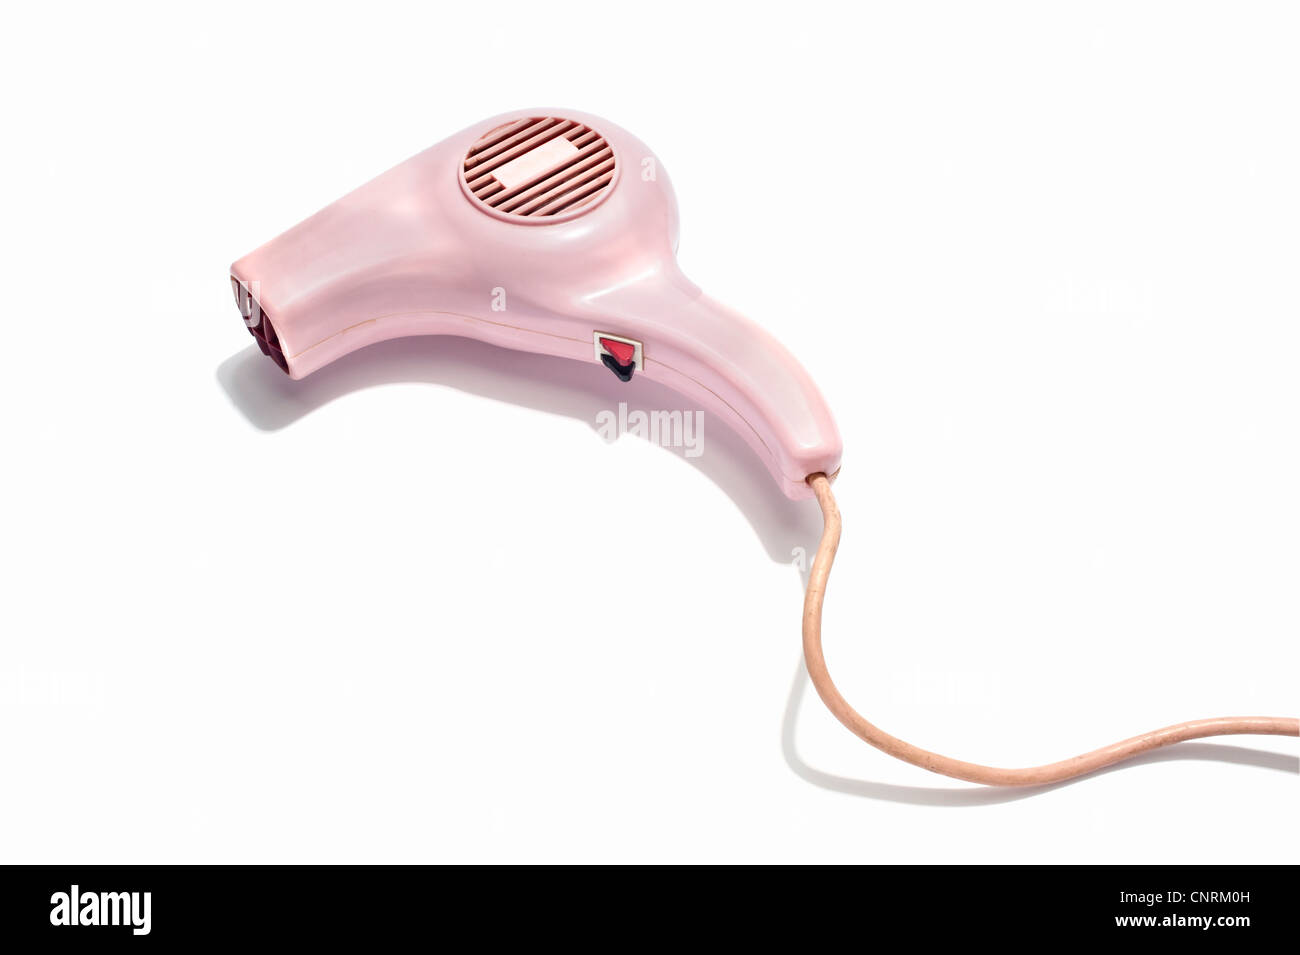 A pink hairdryer Stock Photo